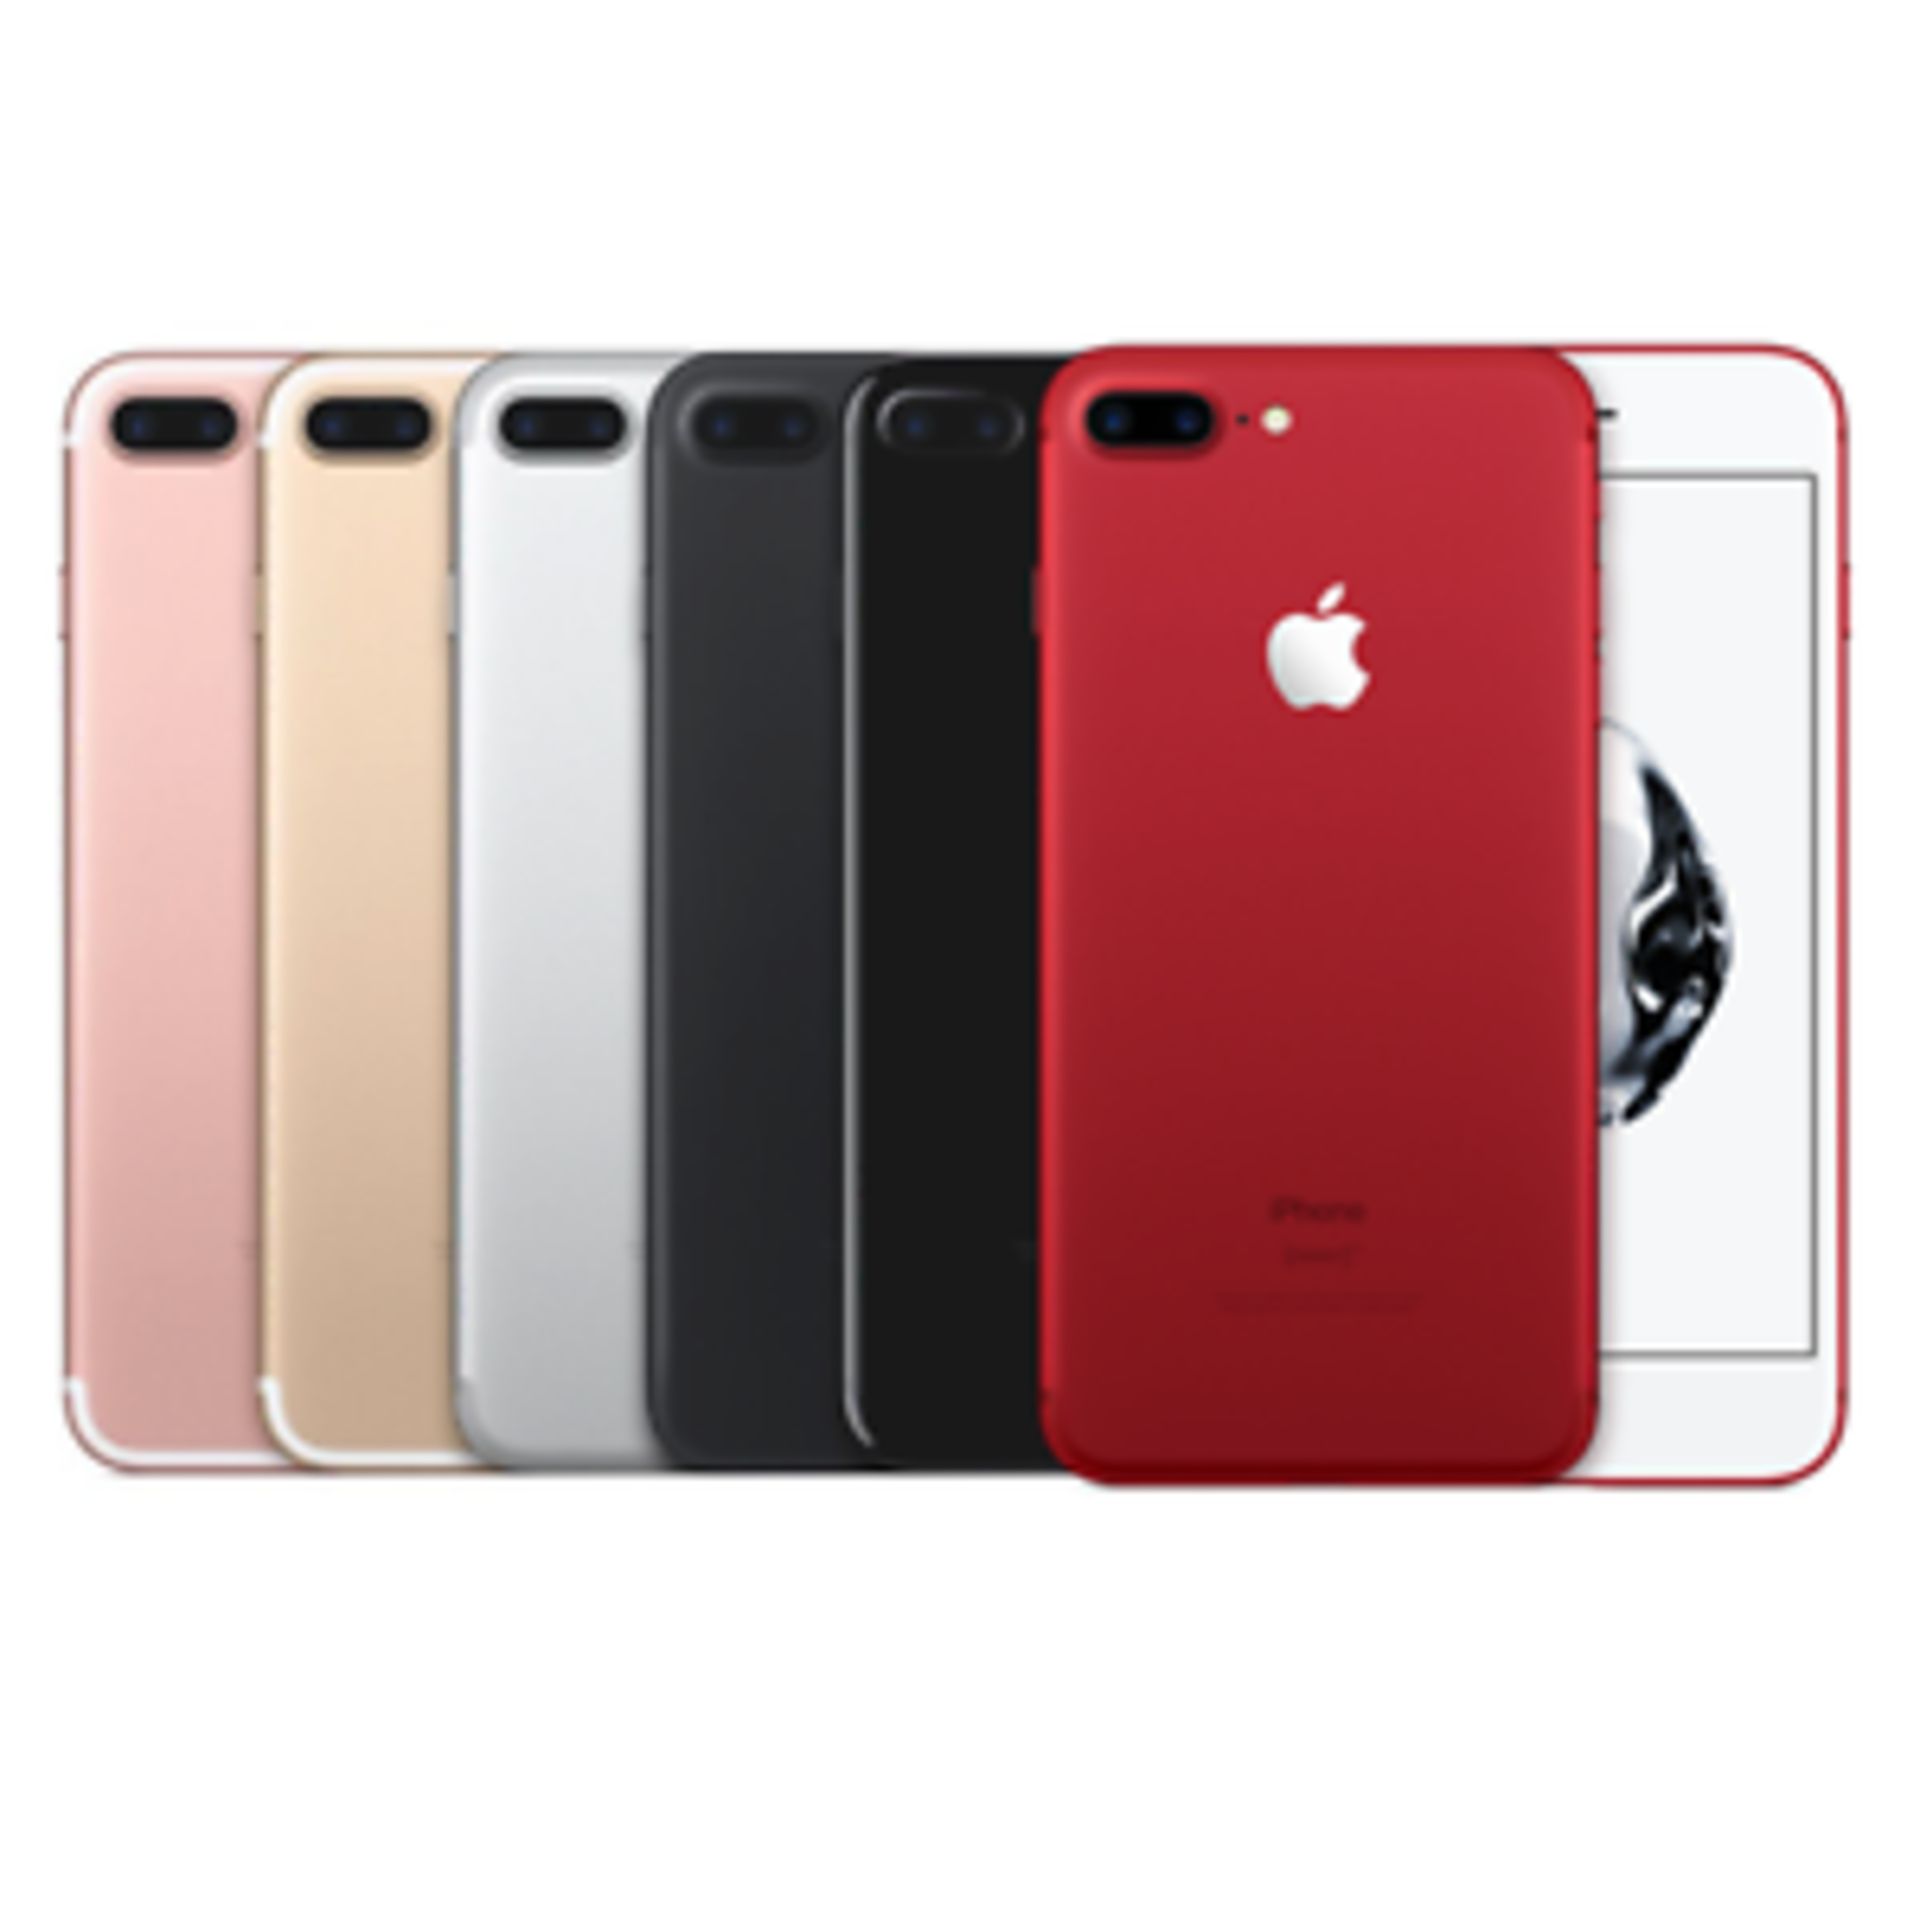 Grade A Apple iPhone 7 Plus 128GB - Colours May Vary - Apple Box With Accessories - Bild 2 aus 2